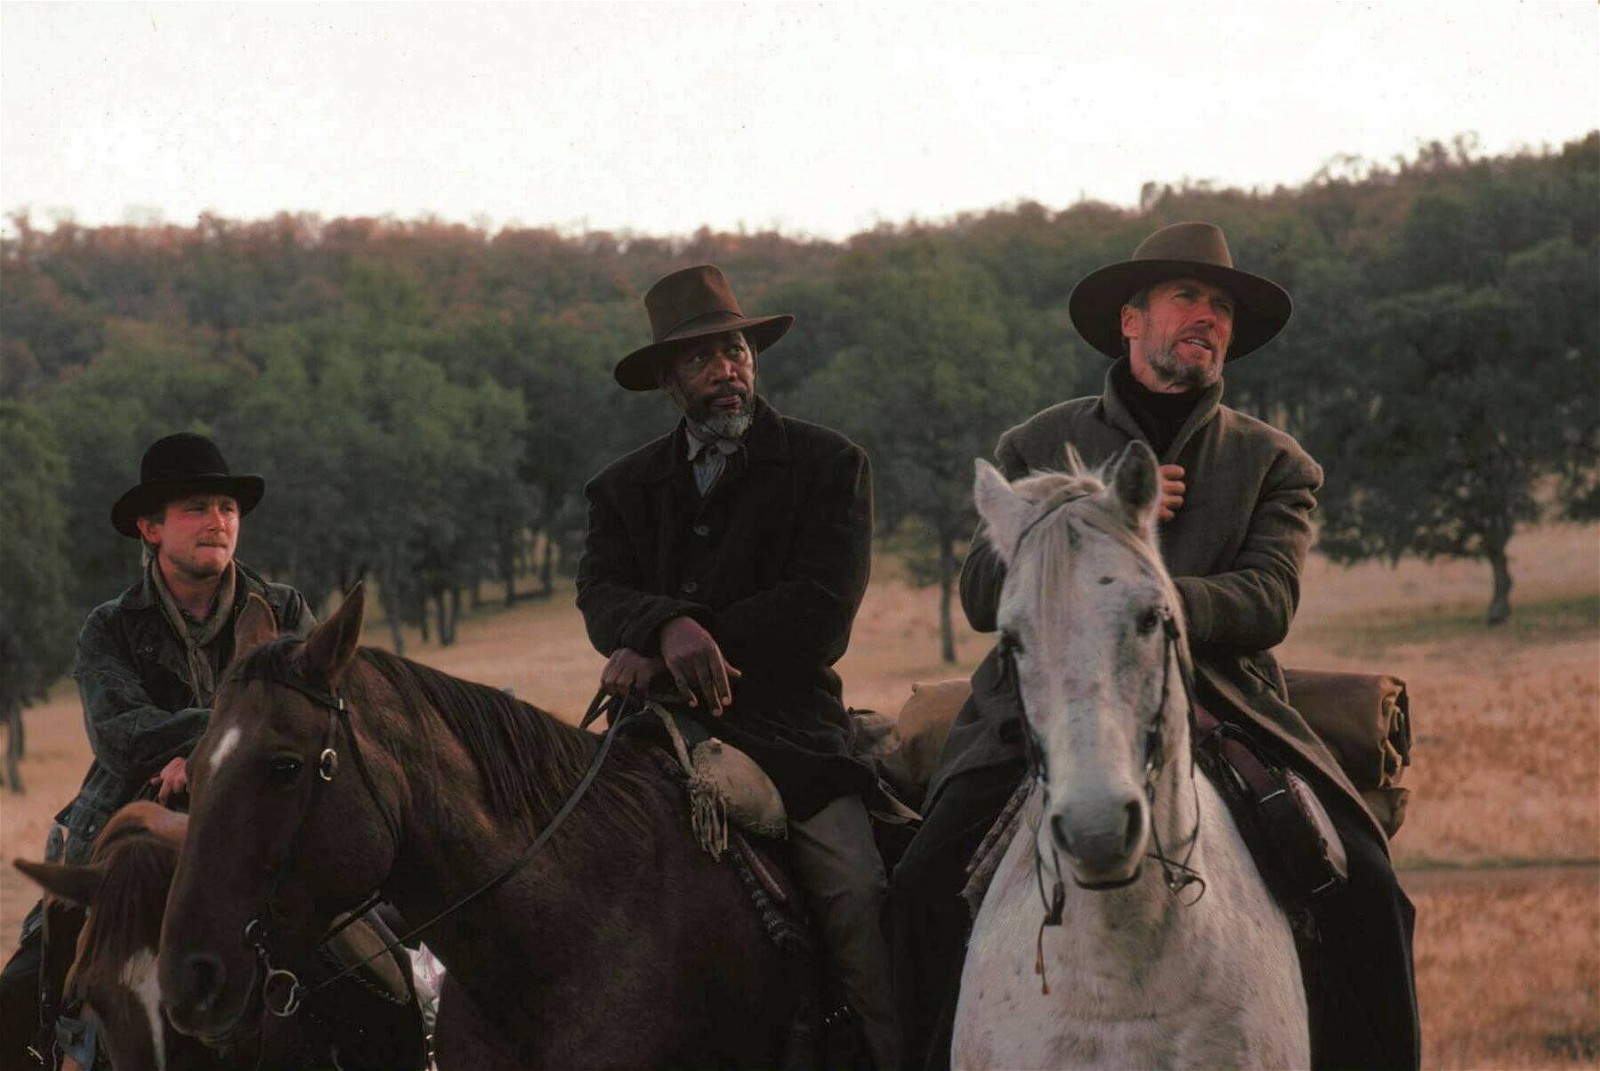 A still of Clint Eastwood and Morgan Freeman from Unforgiven (1992)